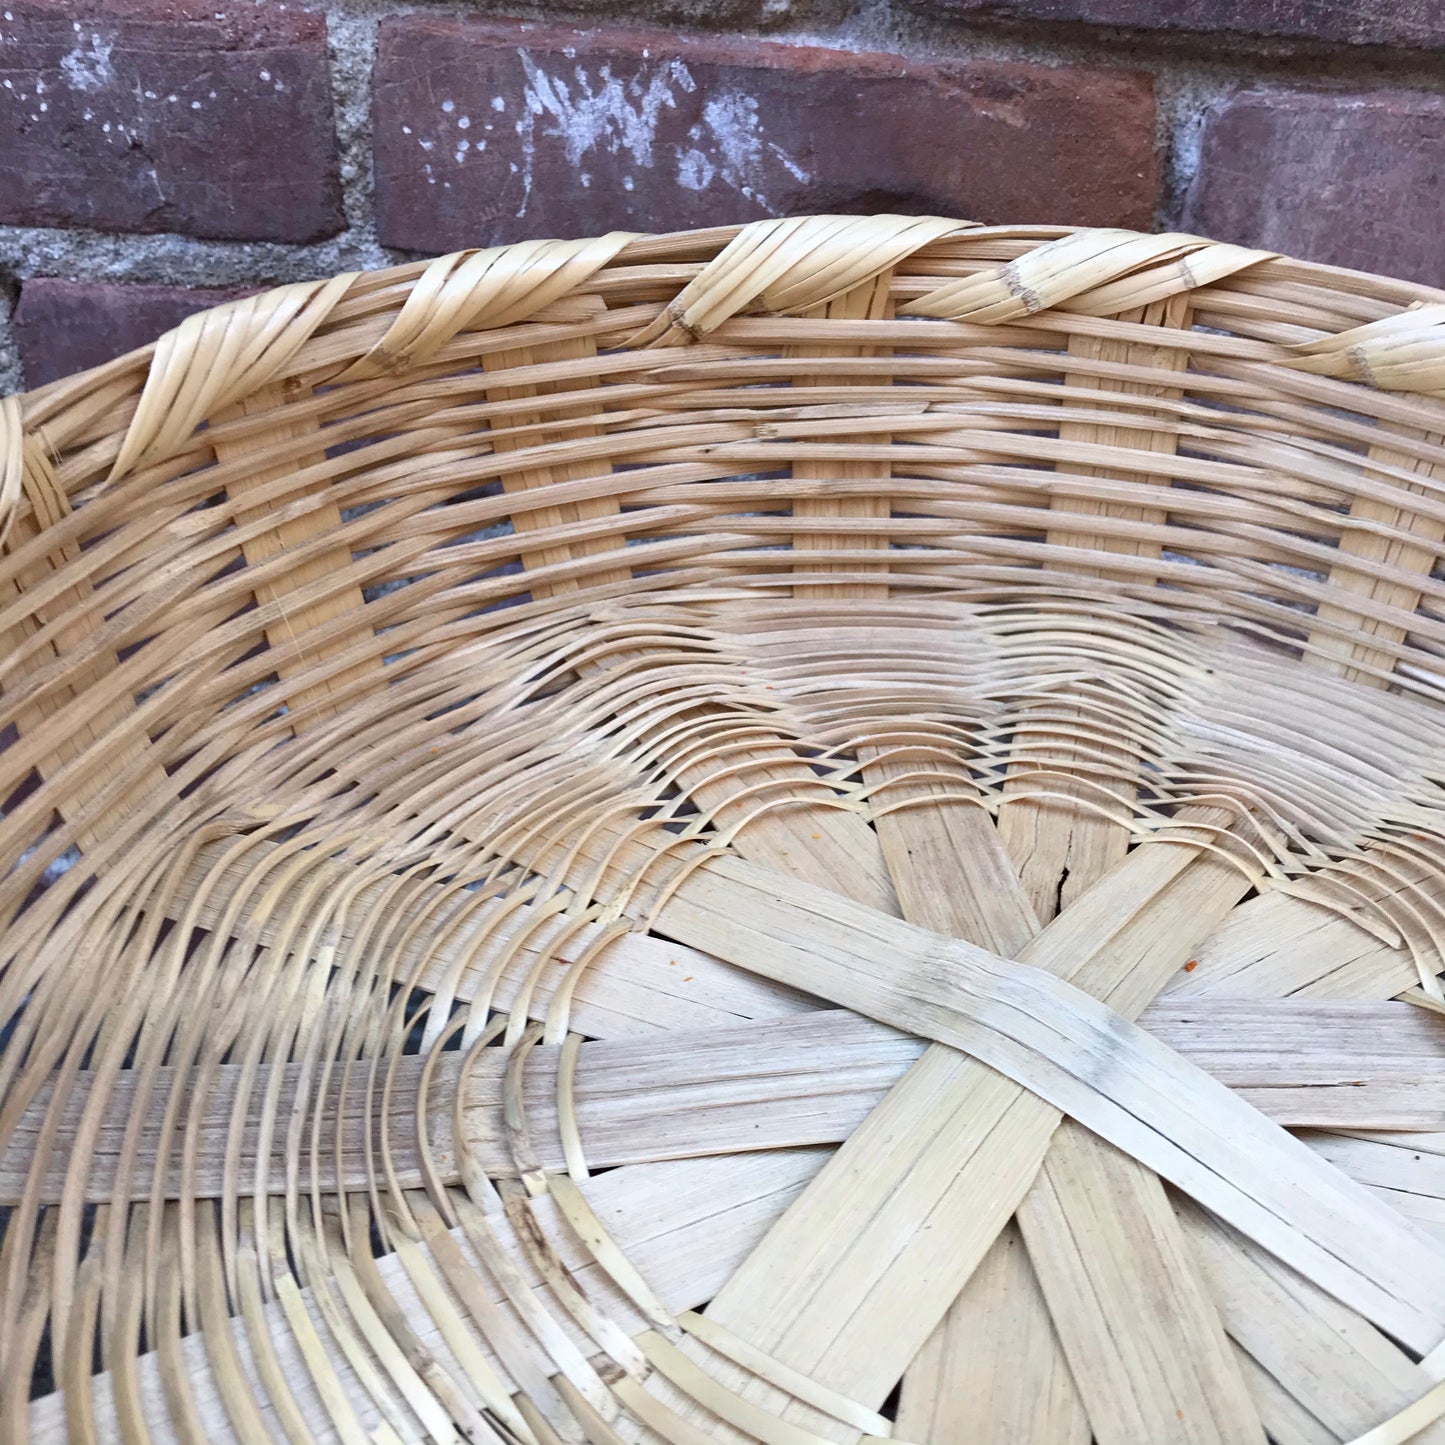 Dried River Reed Carrizo Basket with Handle